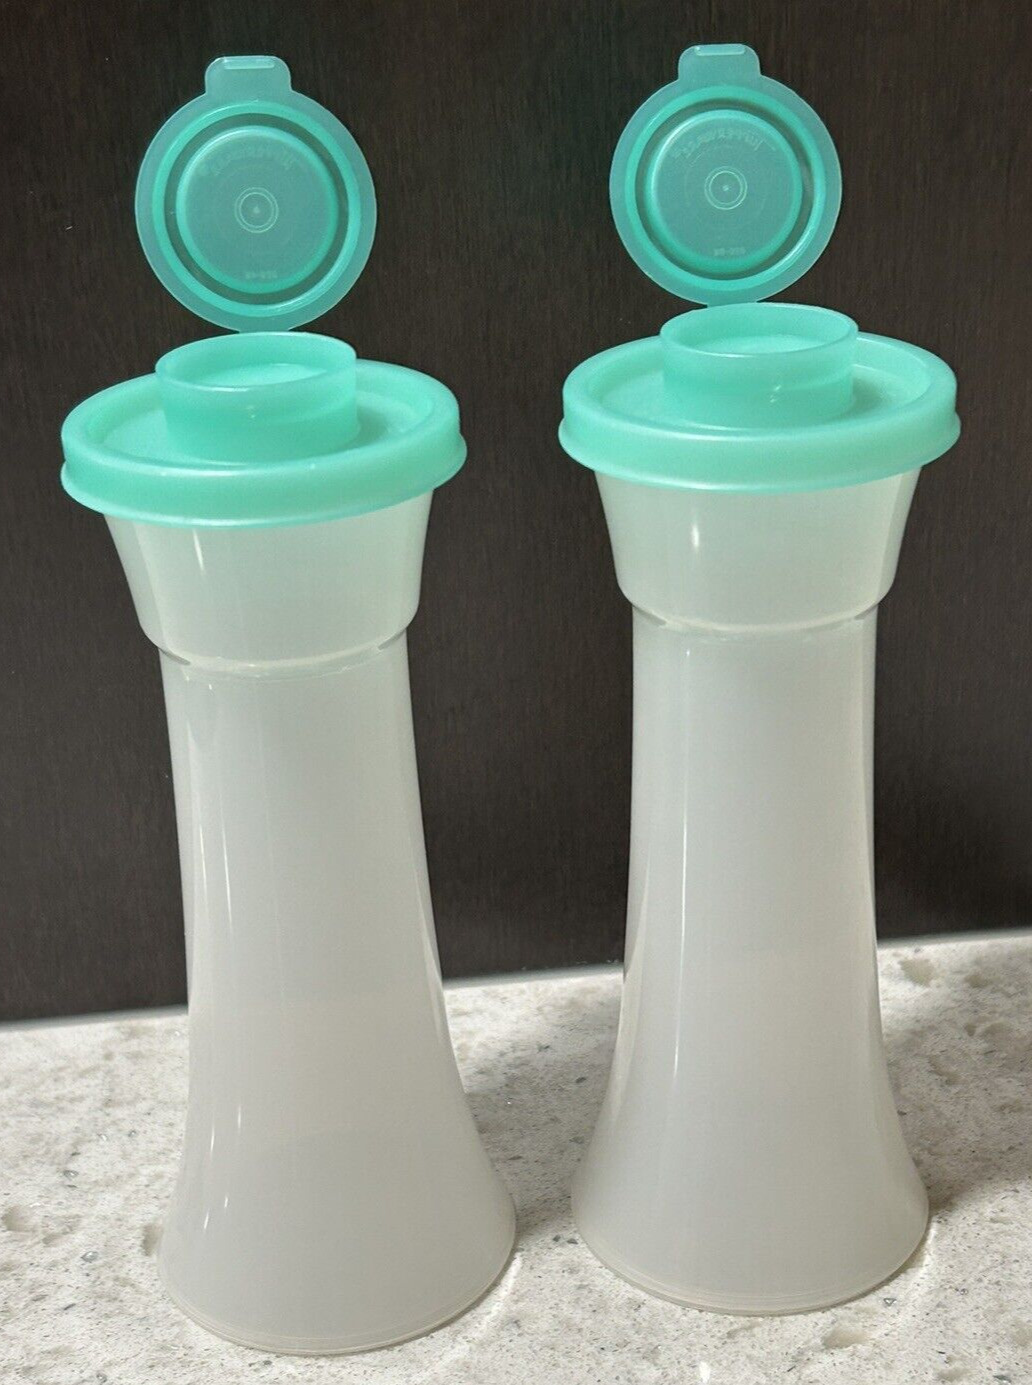 Tupperware Hour Glass Salt and Pepper Shakers with Blue Green Lids- Very clean